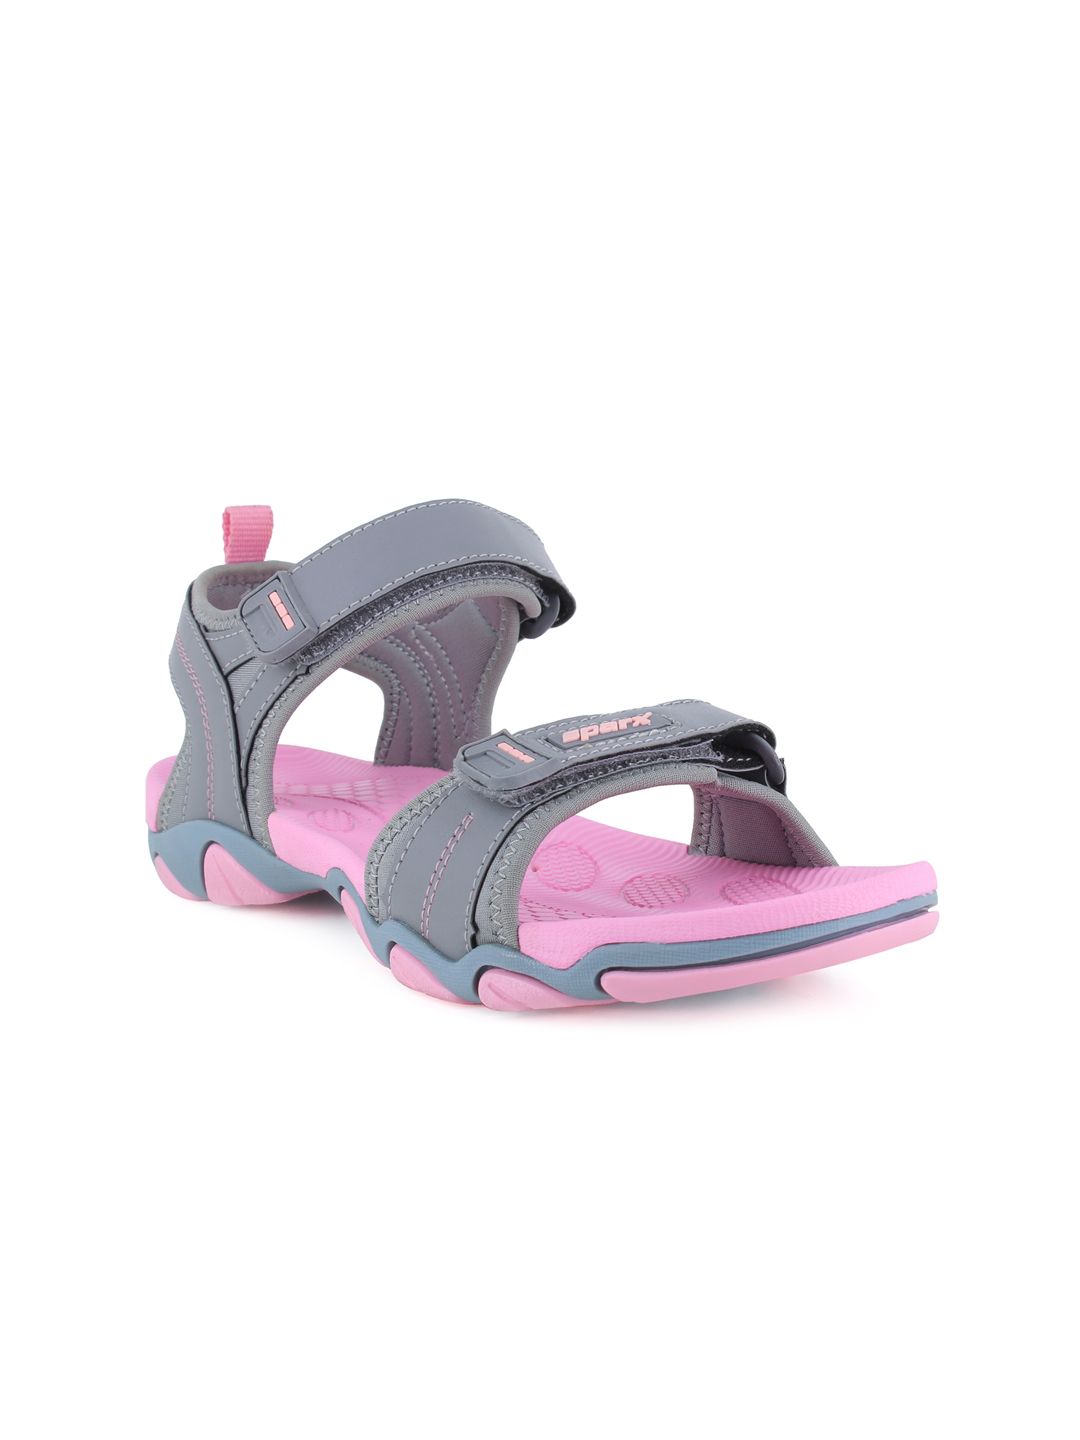 Sparx Women Grey & Pink Patterned Floater Sports Sandal Price in India